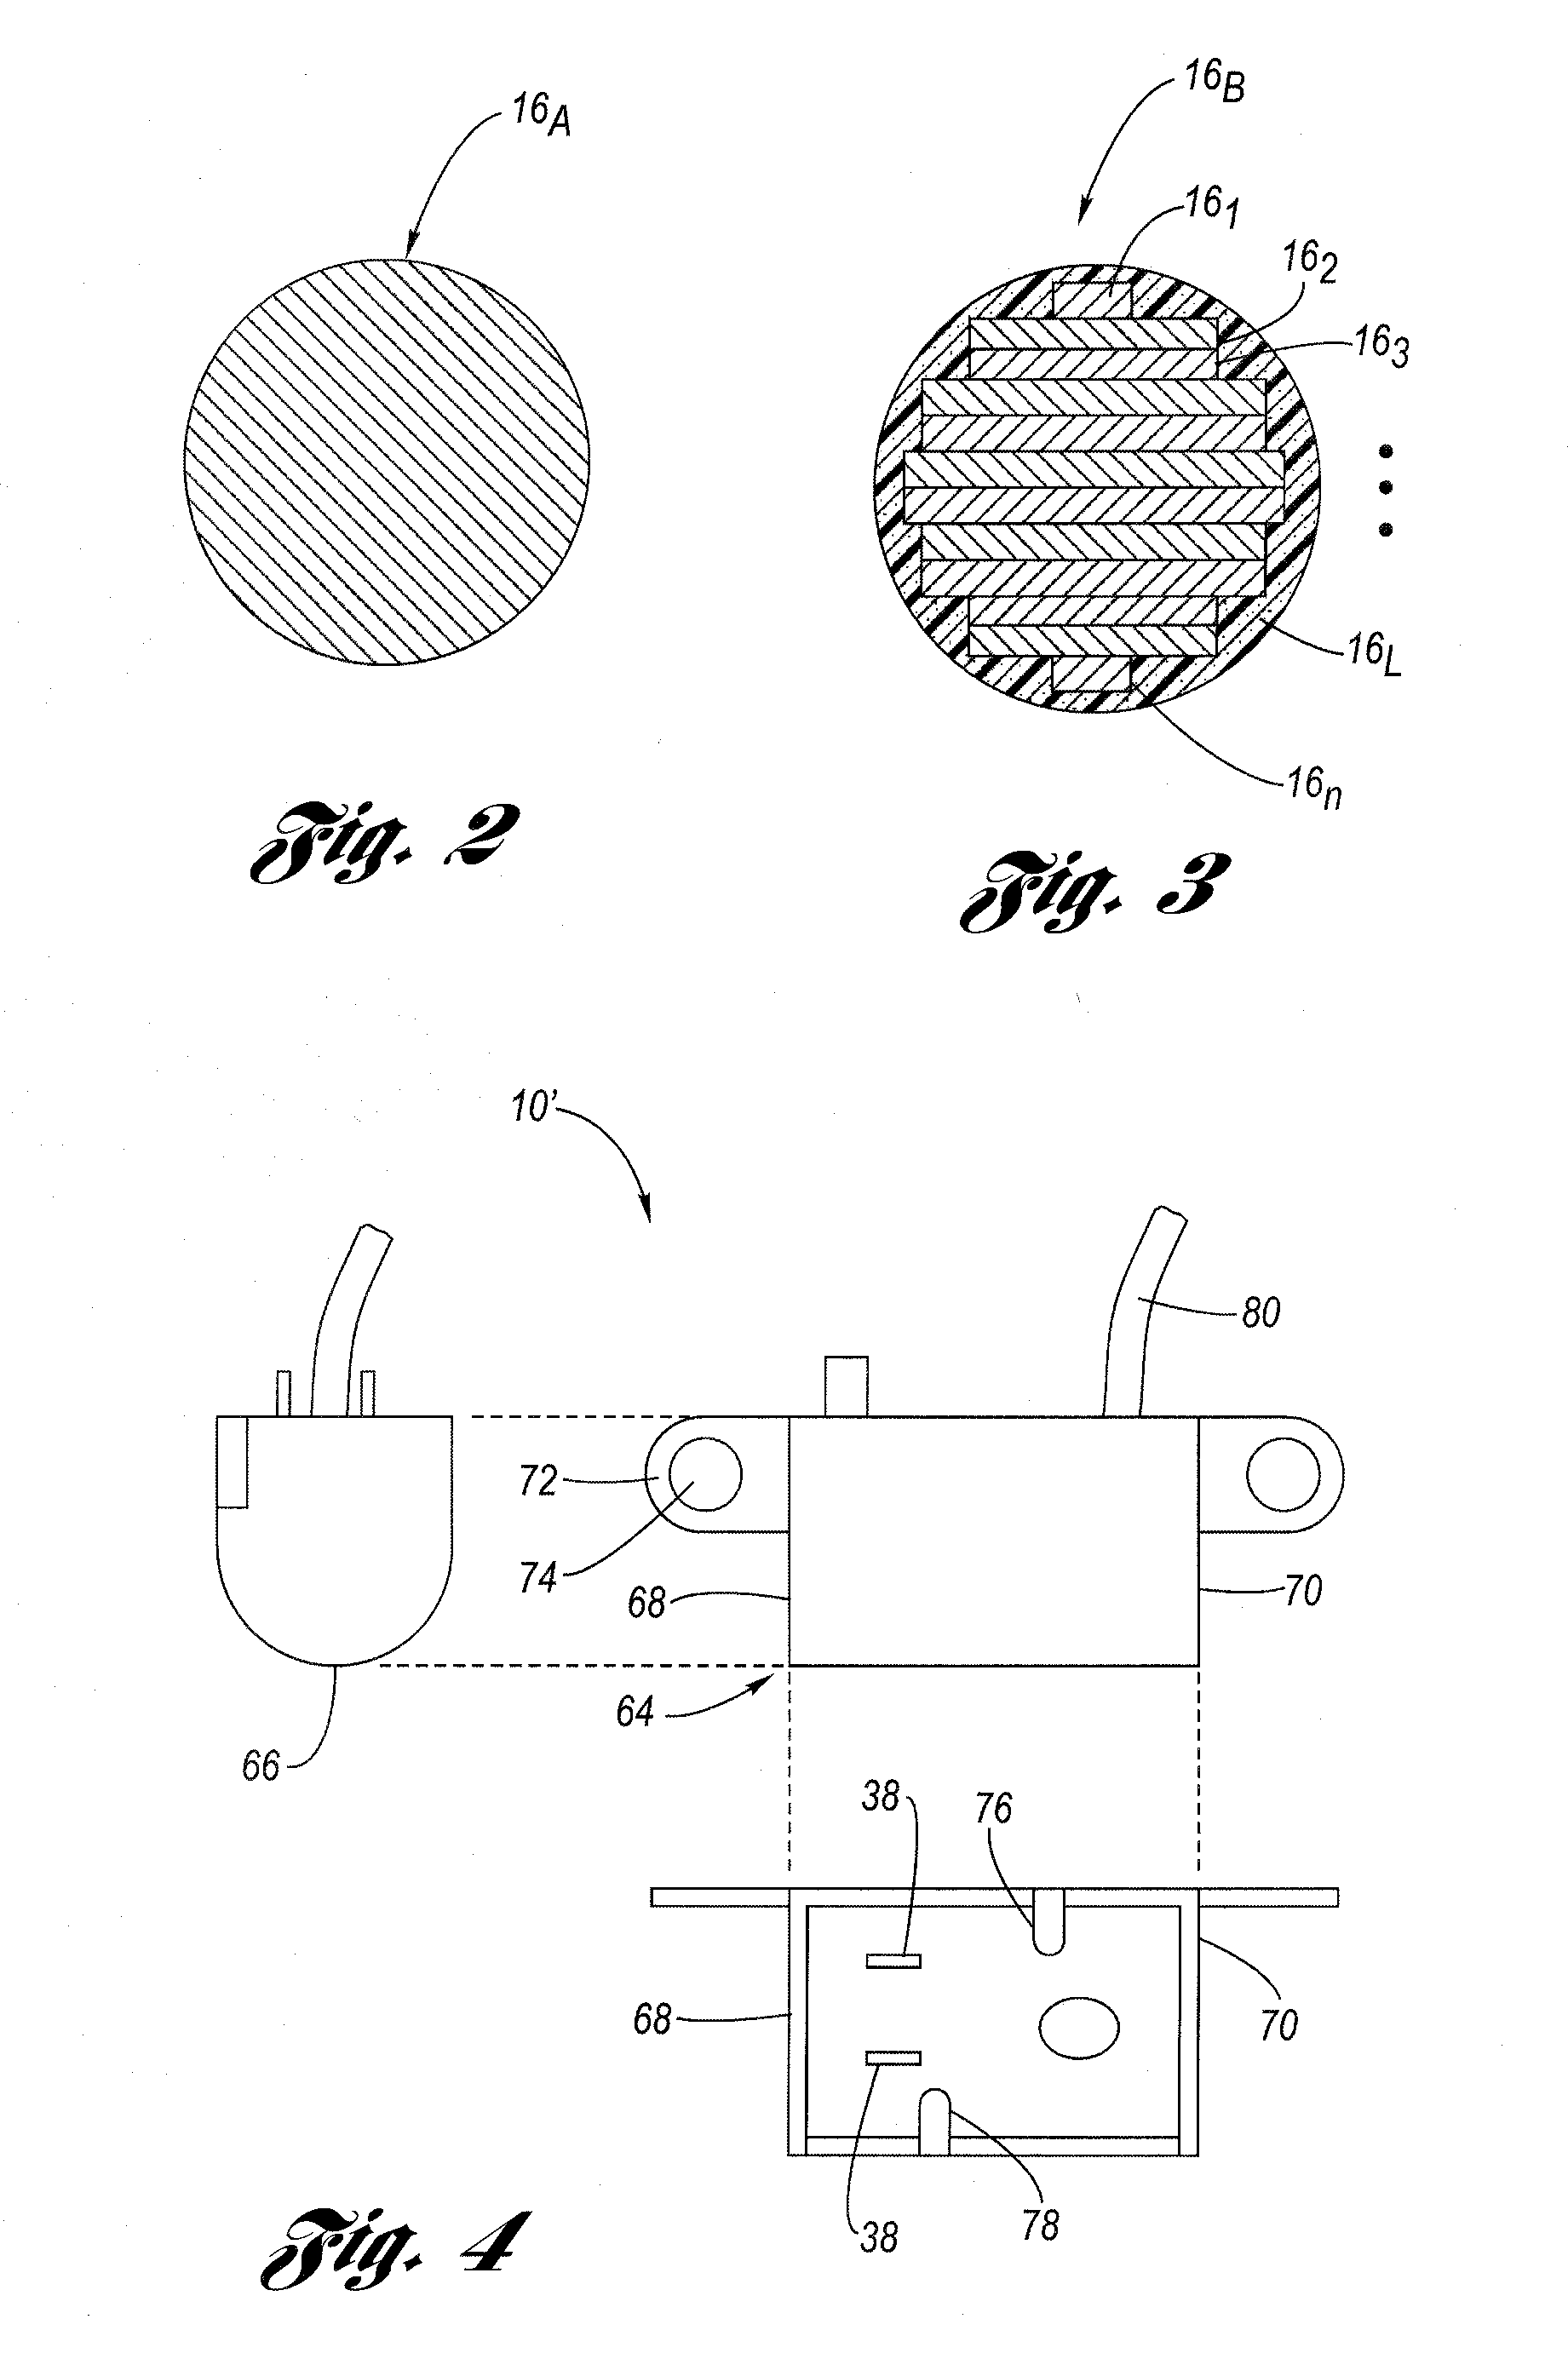 Ignition apparatus with cylindrical core and laminated return path